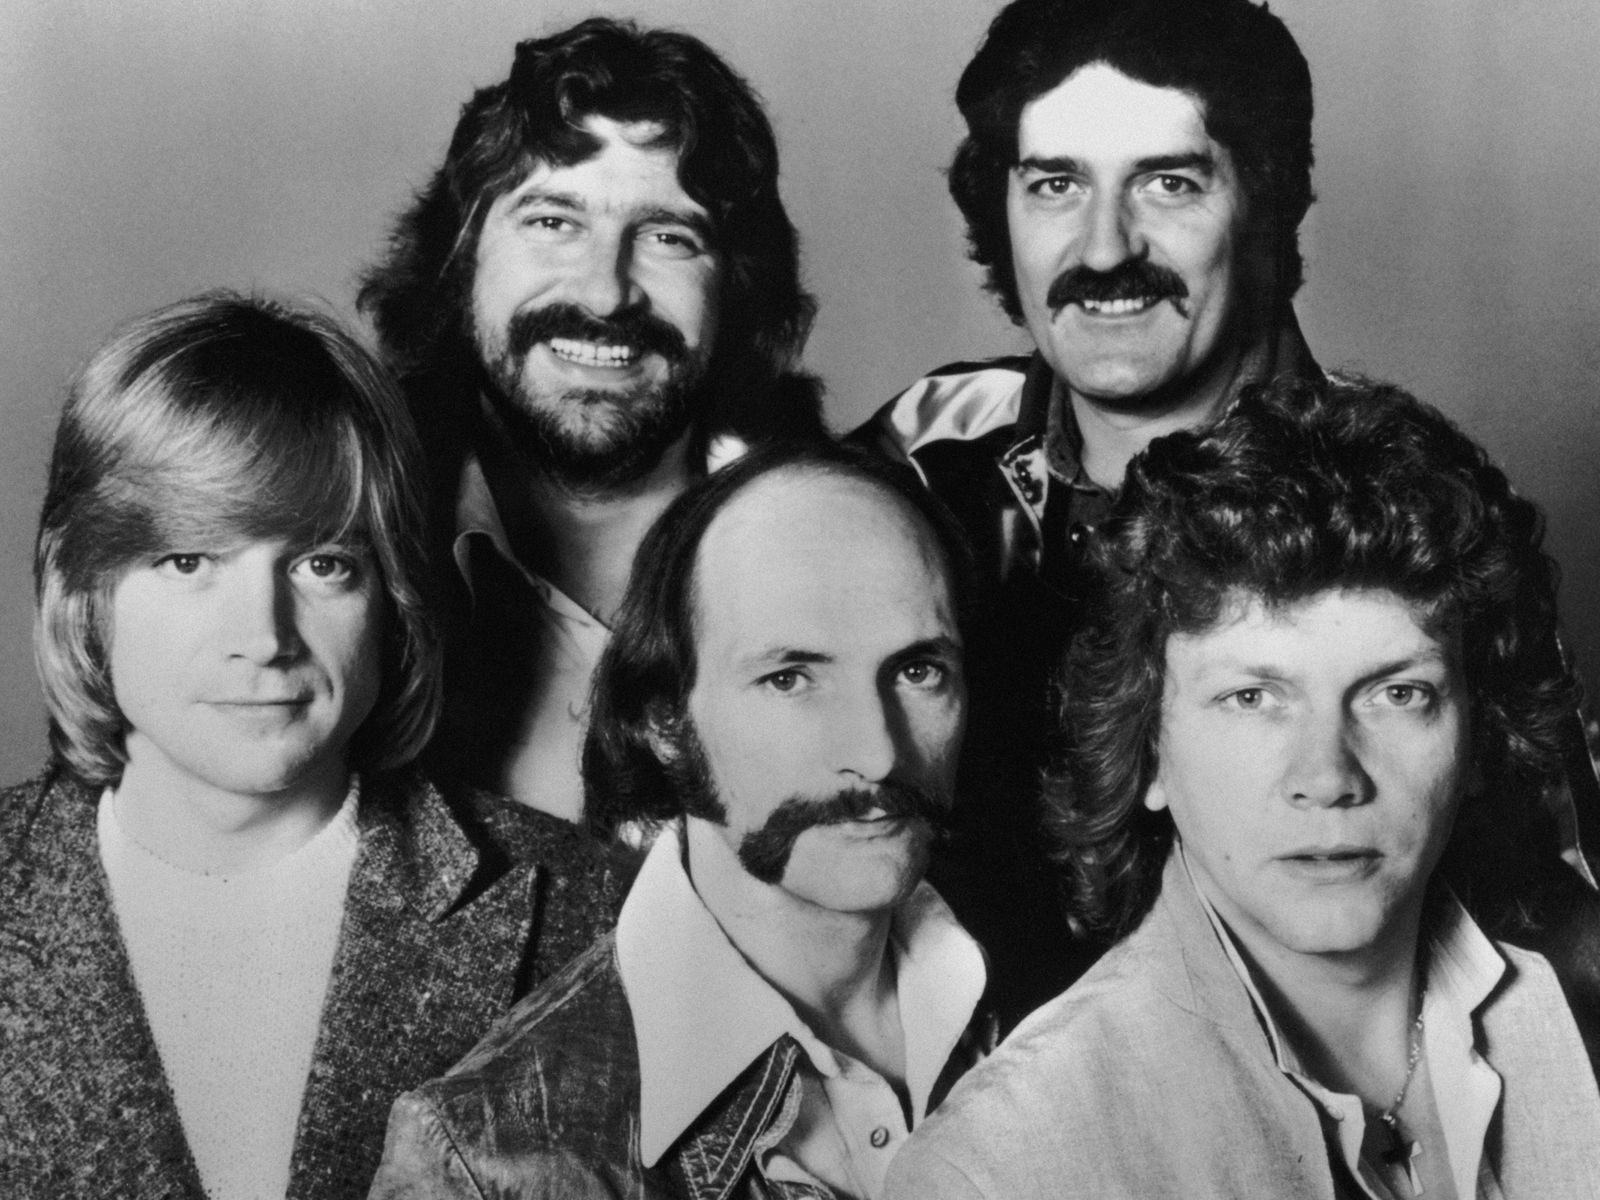 British rock group The Moody Blues, 26th July 1978. Clockwise from top left, Graeme Edge, Ray Thomas, John Lodge, Mike Pinder and Justin Hayward. (Photo by Keystone/Hulton Archive/Getty Images)